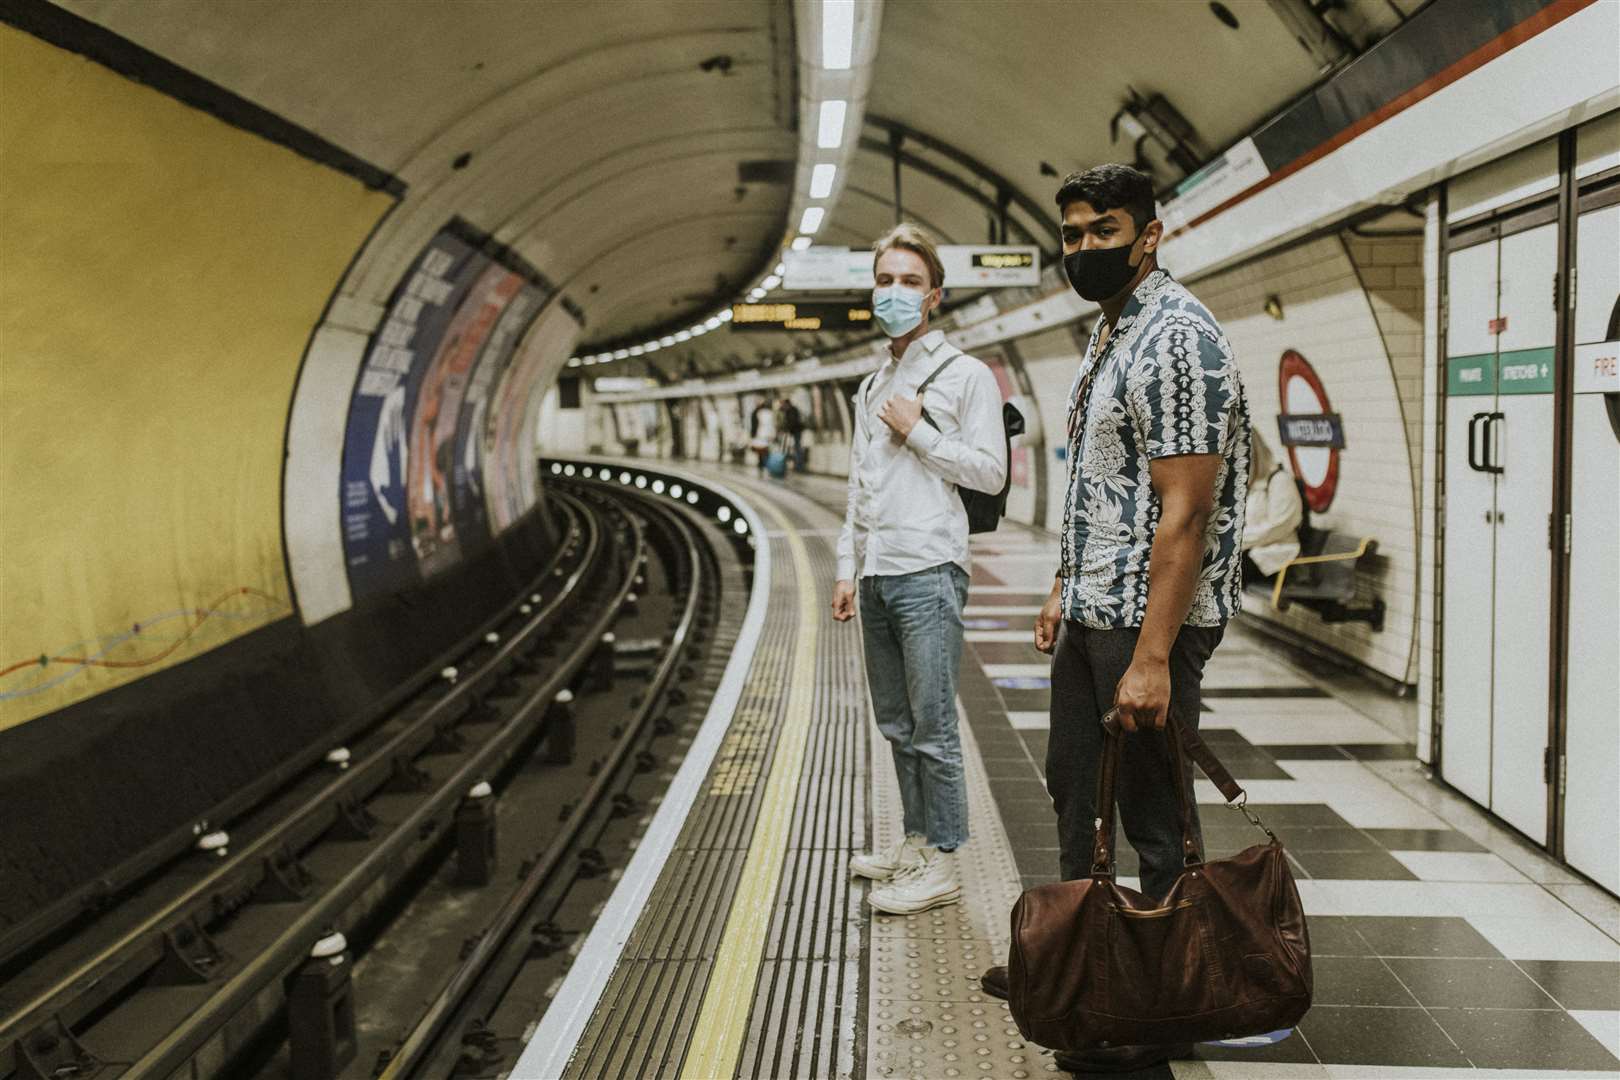 Plan your journey ahead of time is the request for those going into London